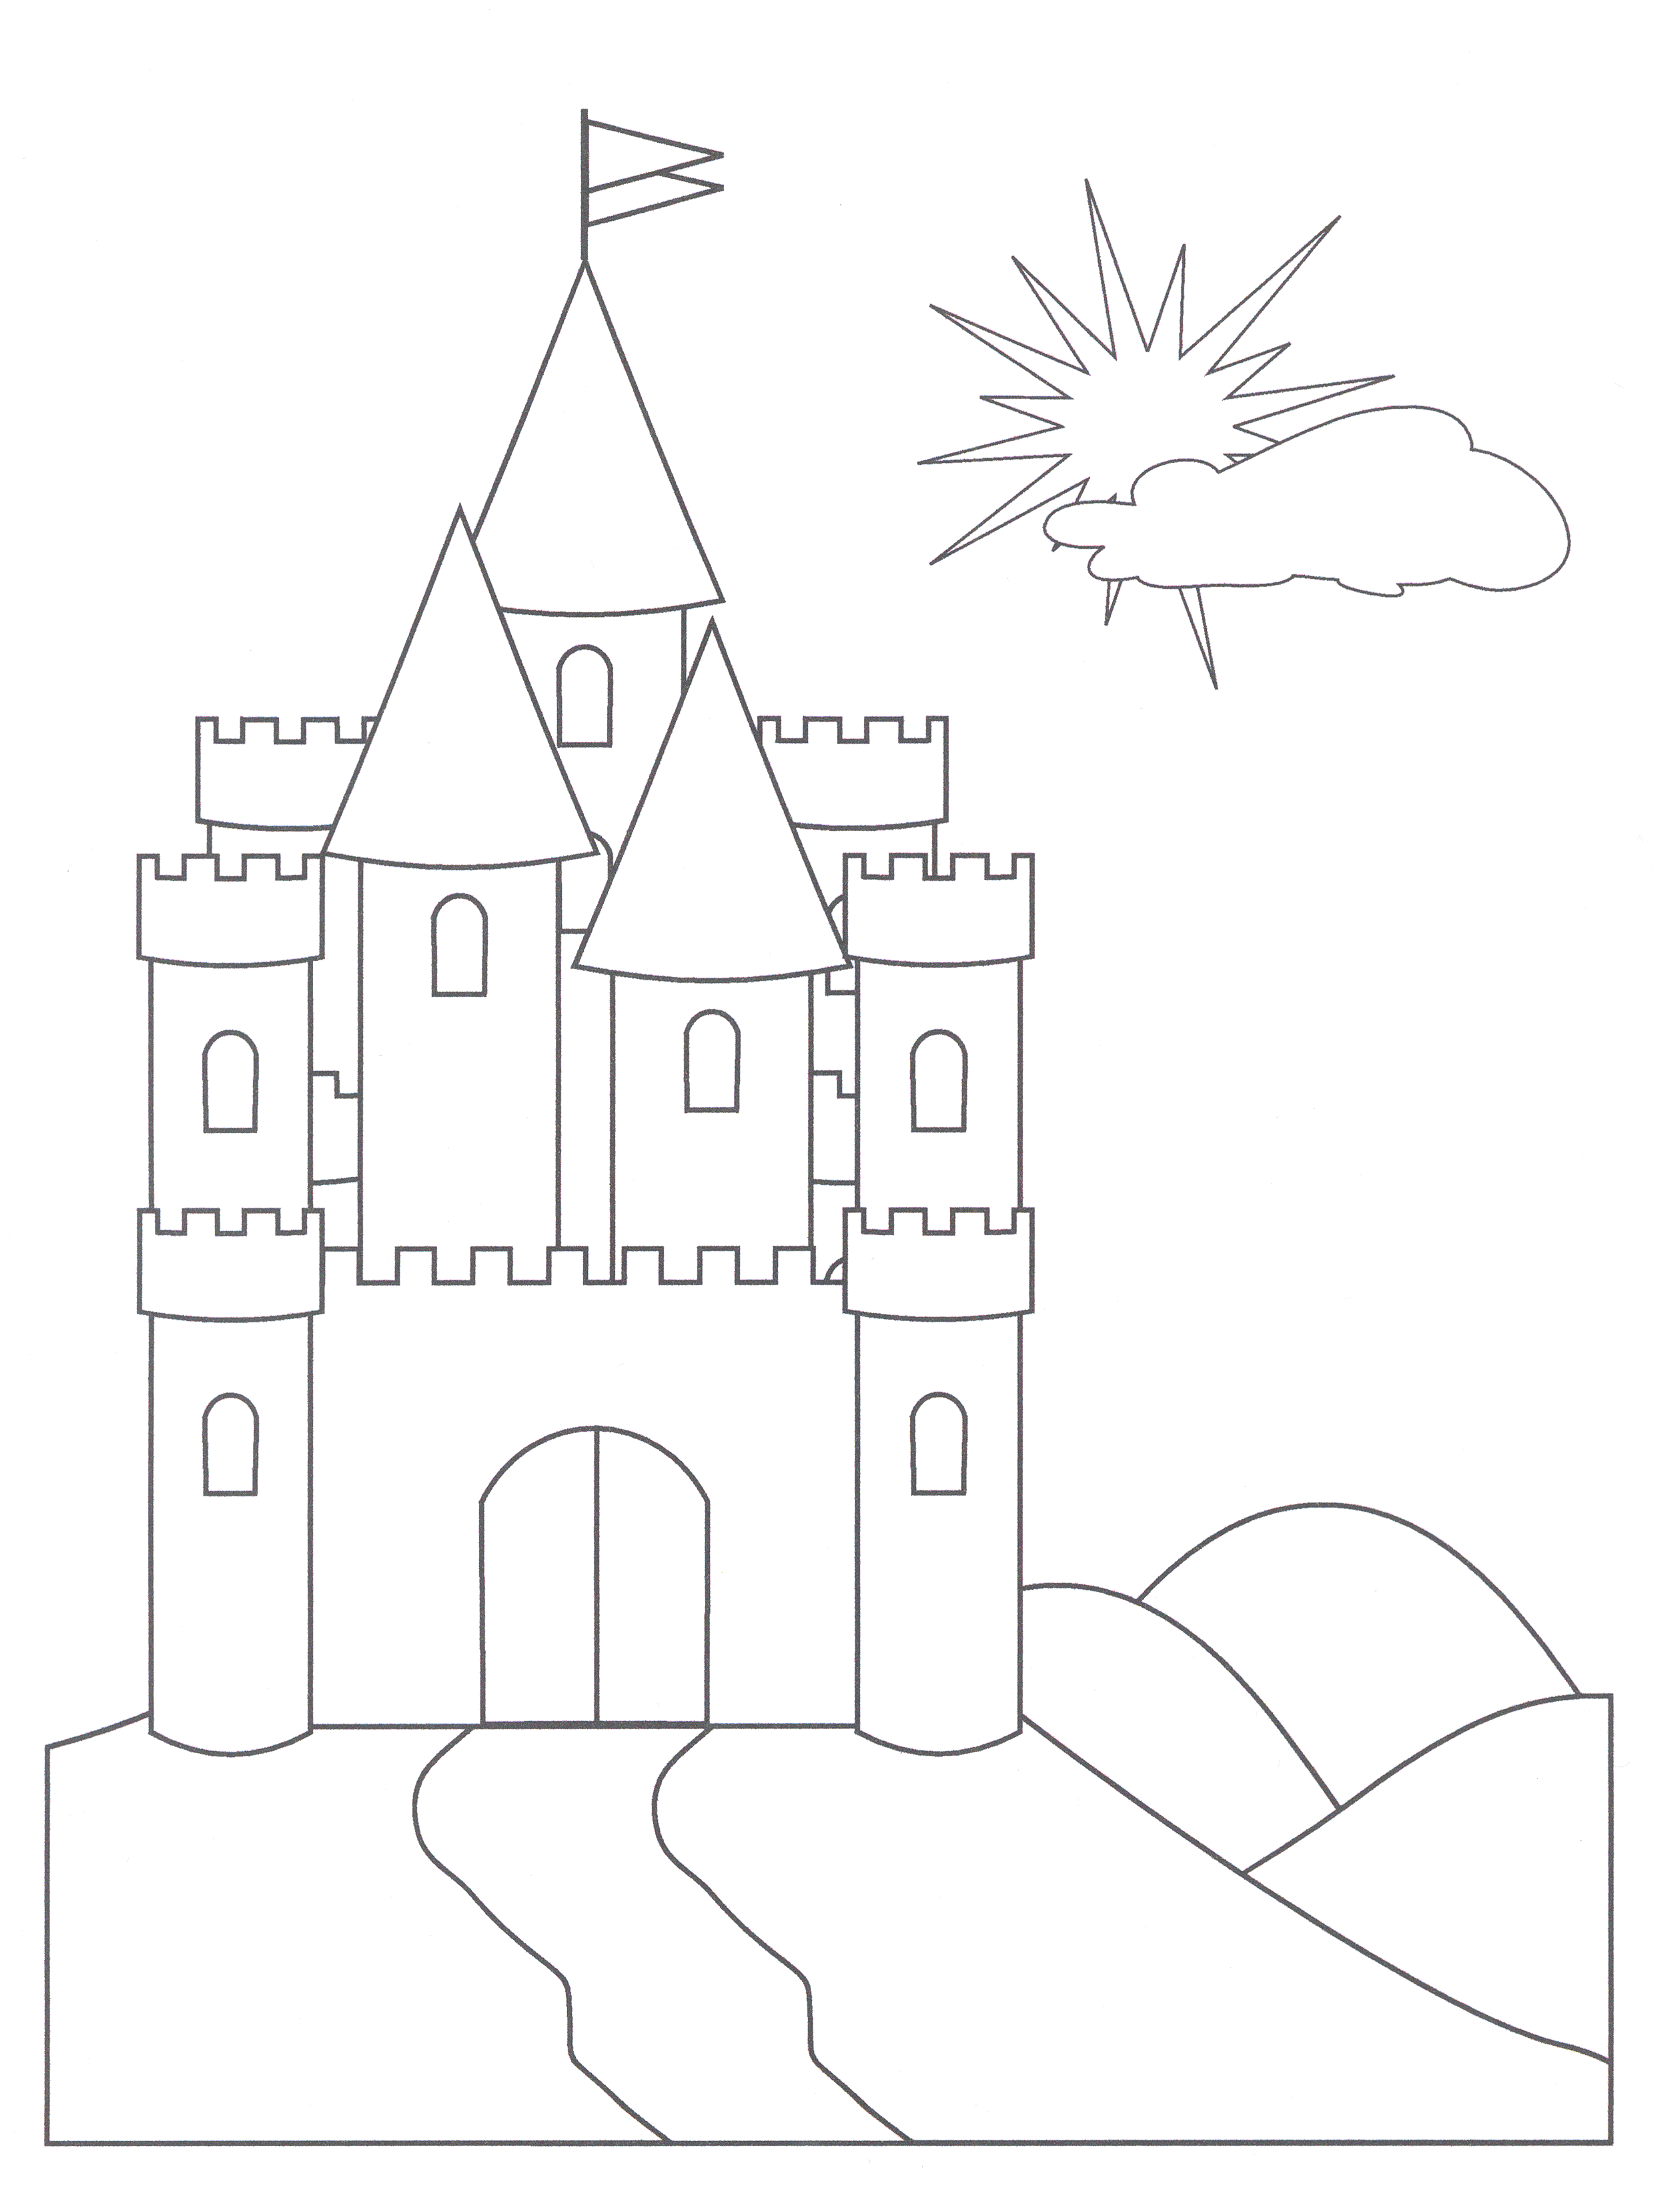 3D castle model - Download and Print - Just4Kids And Me